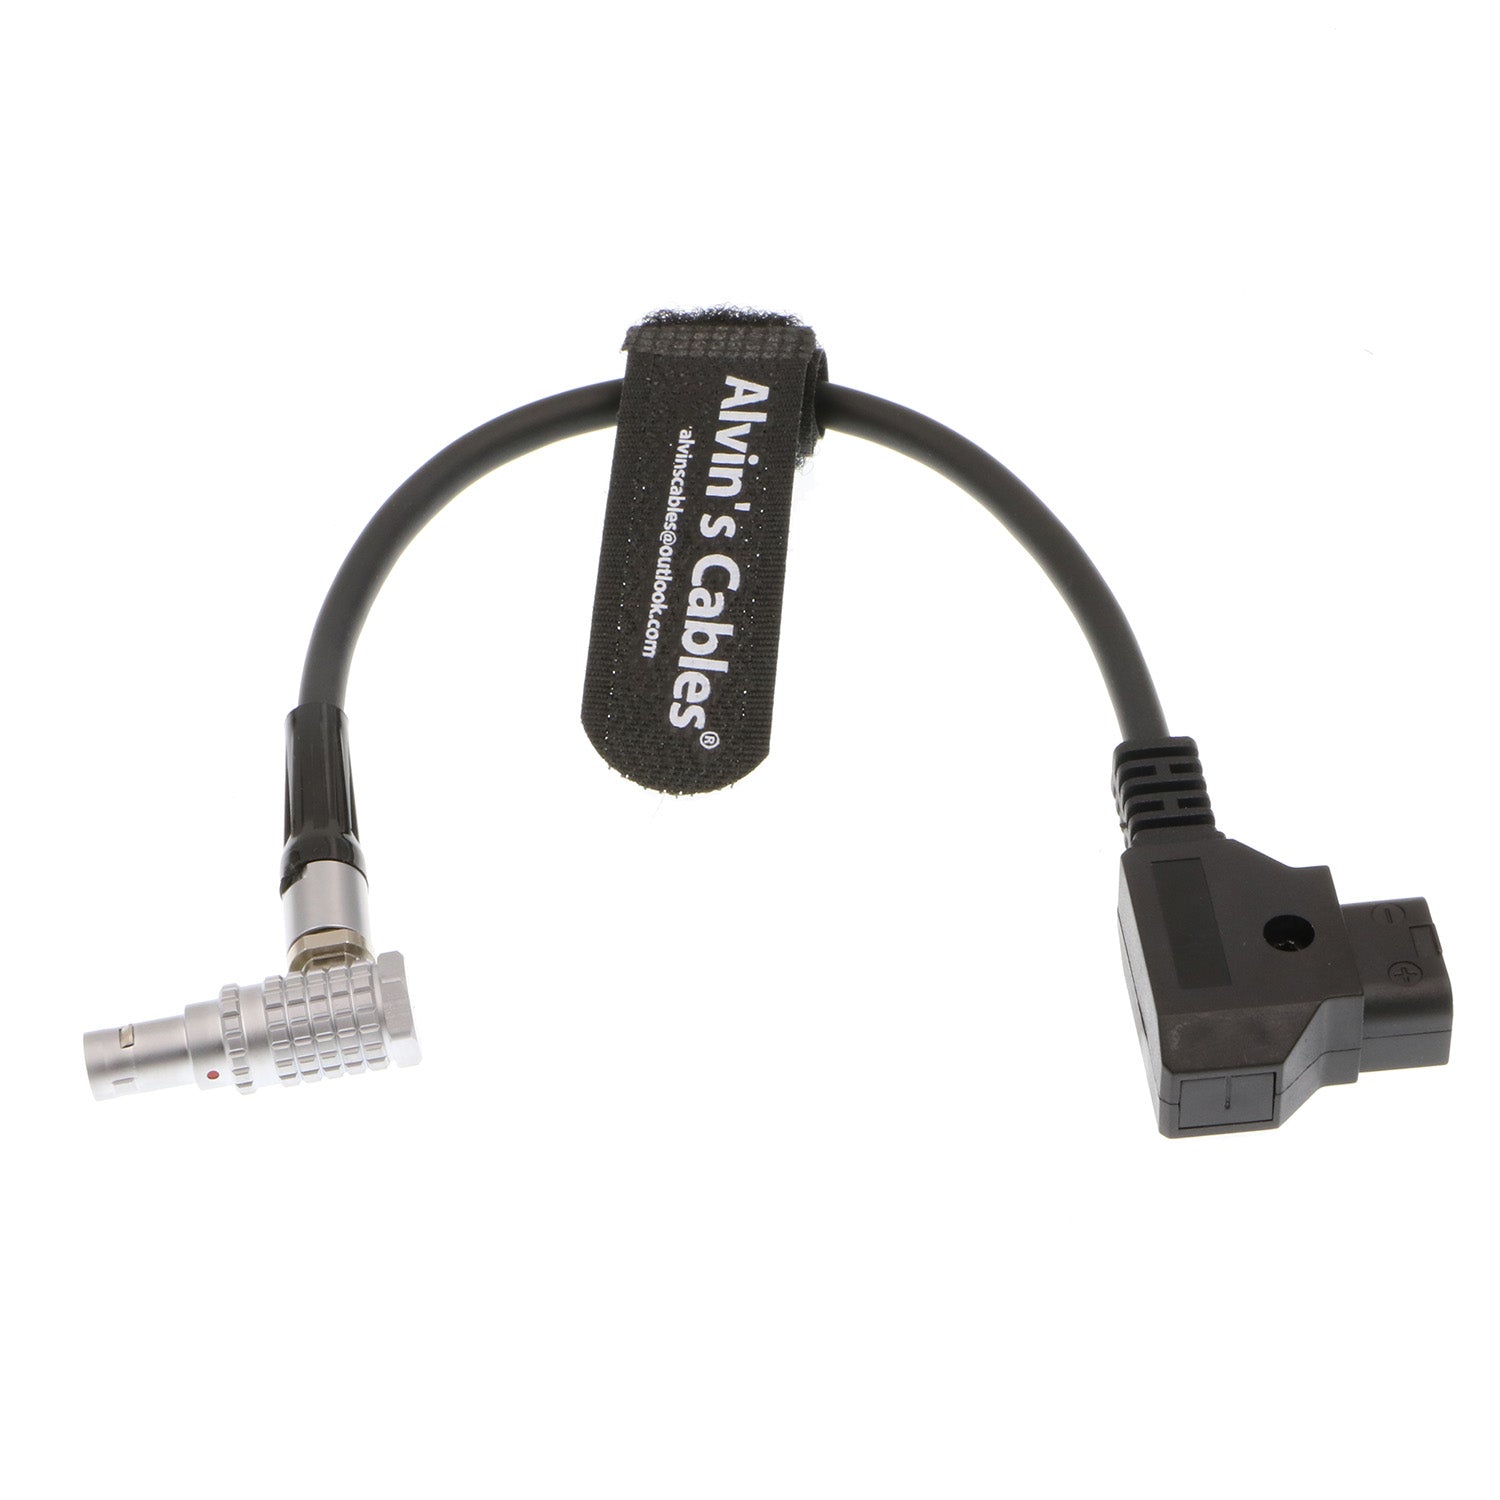 Alvin's Cables 4 Pin Male Right Angle to D-tap Power Cable for Hollyland Cosmo 400 Wireless Video Transmission System